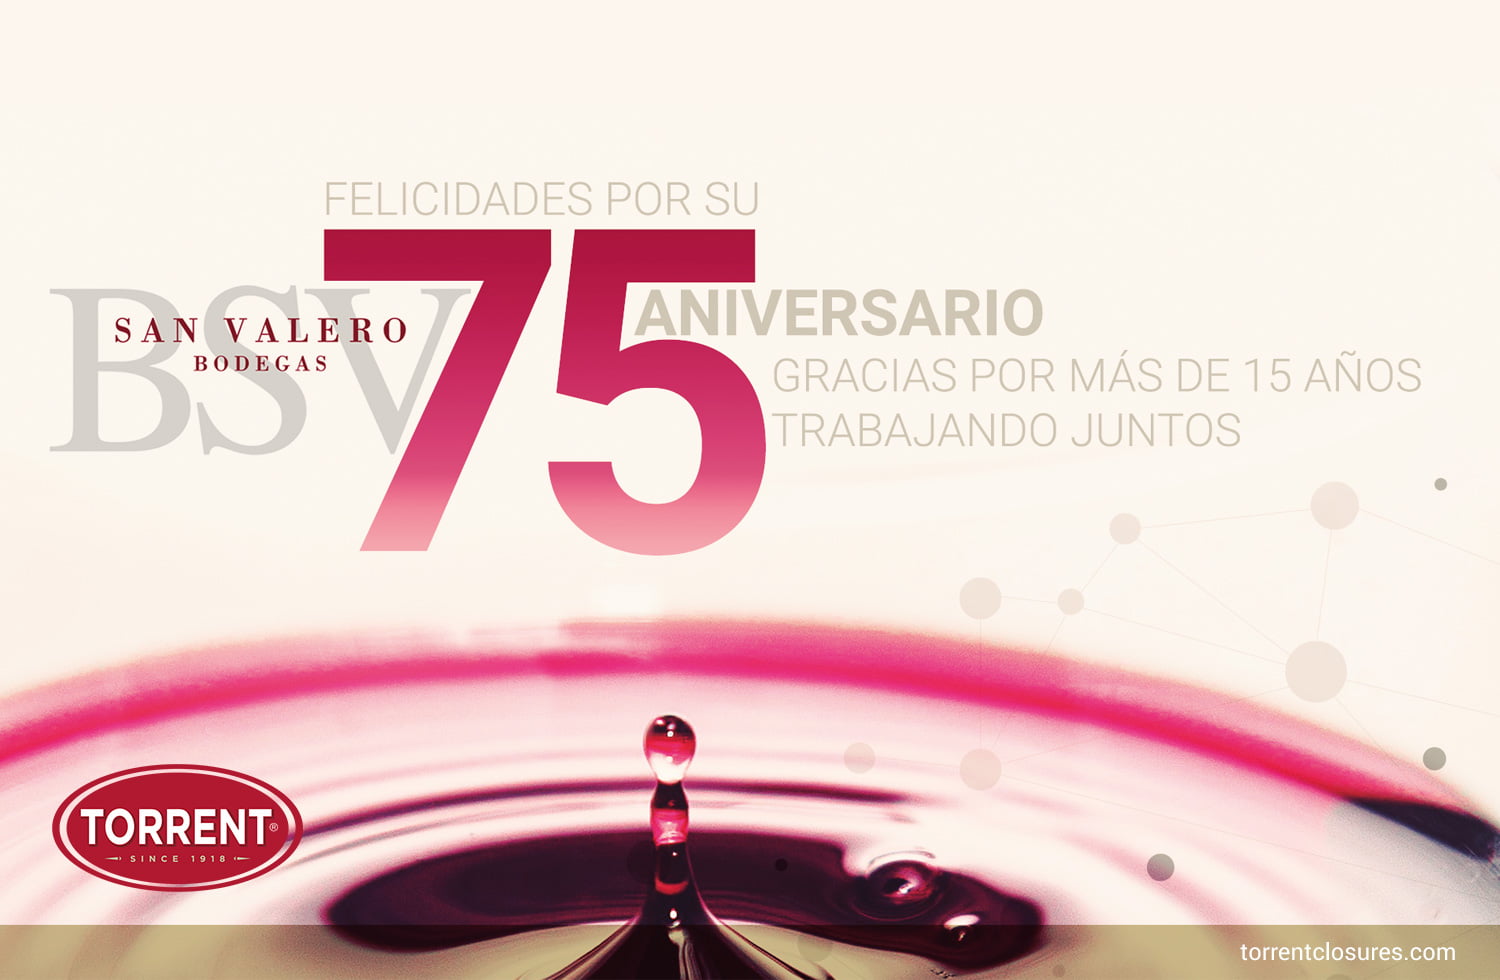 We can’t miss out on the occasion of congratulating the great “family” of San Valero Winery on their 75th Anniversary-Bodegas San Valero | Grupo Torrent